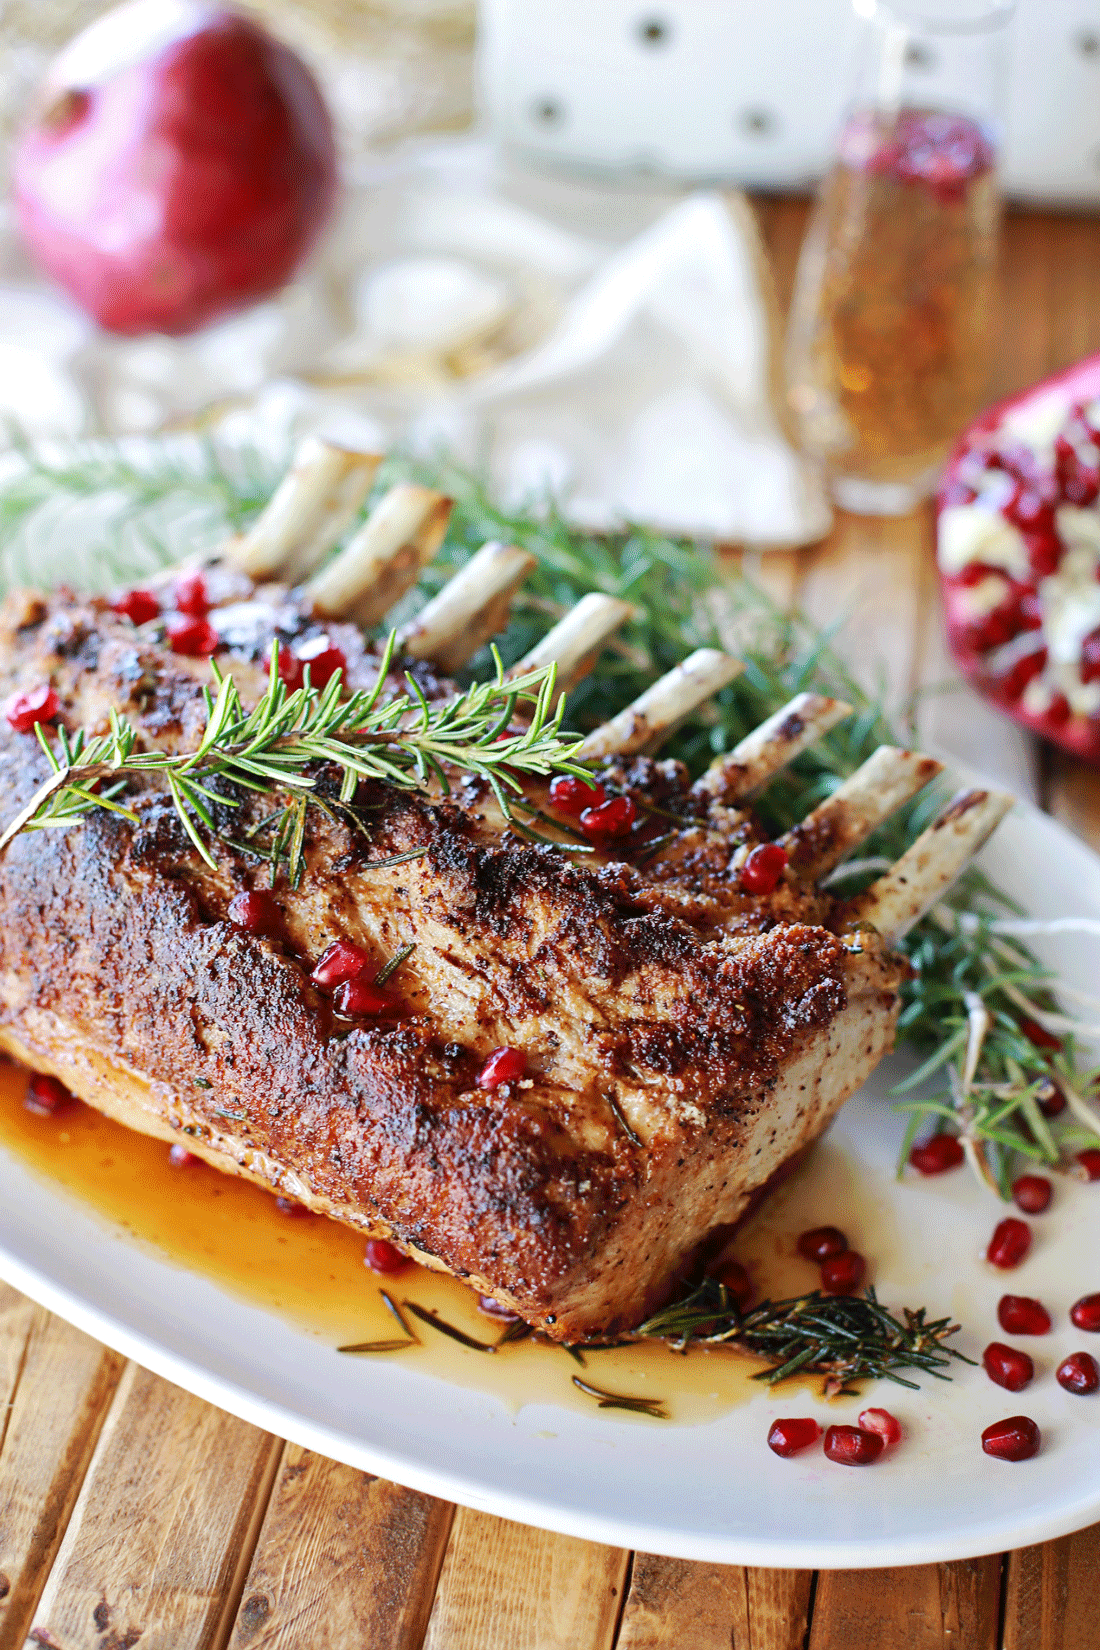 https://cdn.lowgif.com/small/3a2ccc42b01e965c-rosemary-roasted-rack-of-pork-with-pomegranate-au-jus-tangled-with.gif